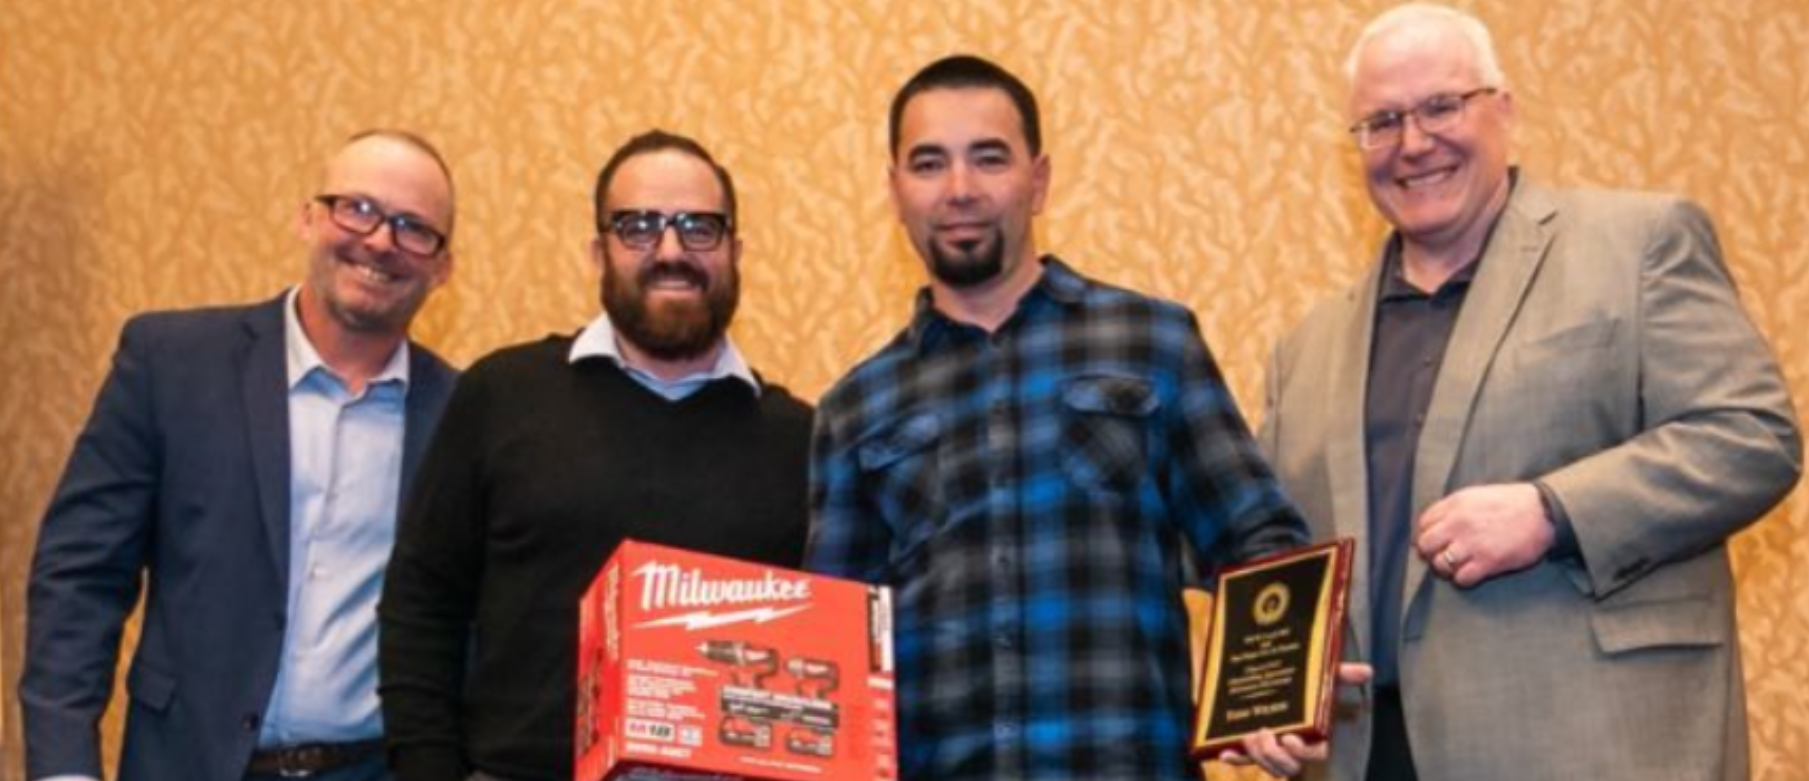 Apprentice of the Year Spotlight: Todd Wilson’s Journey from Apprentice to Journeyman Electrician